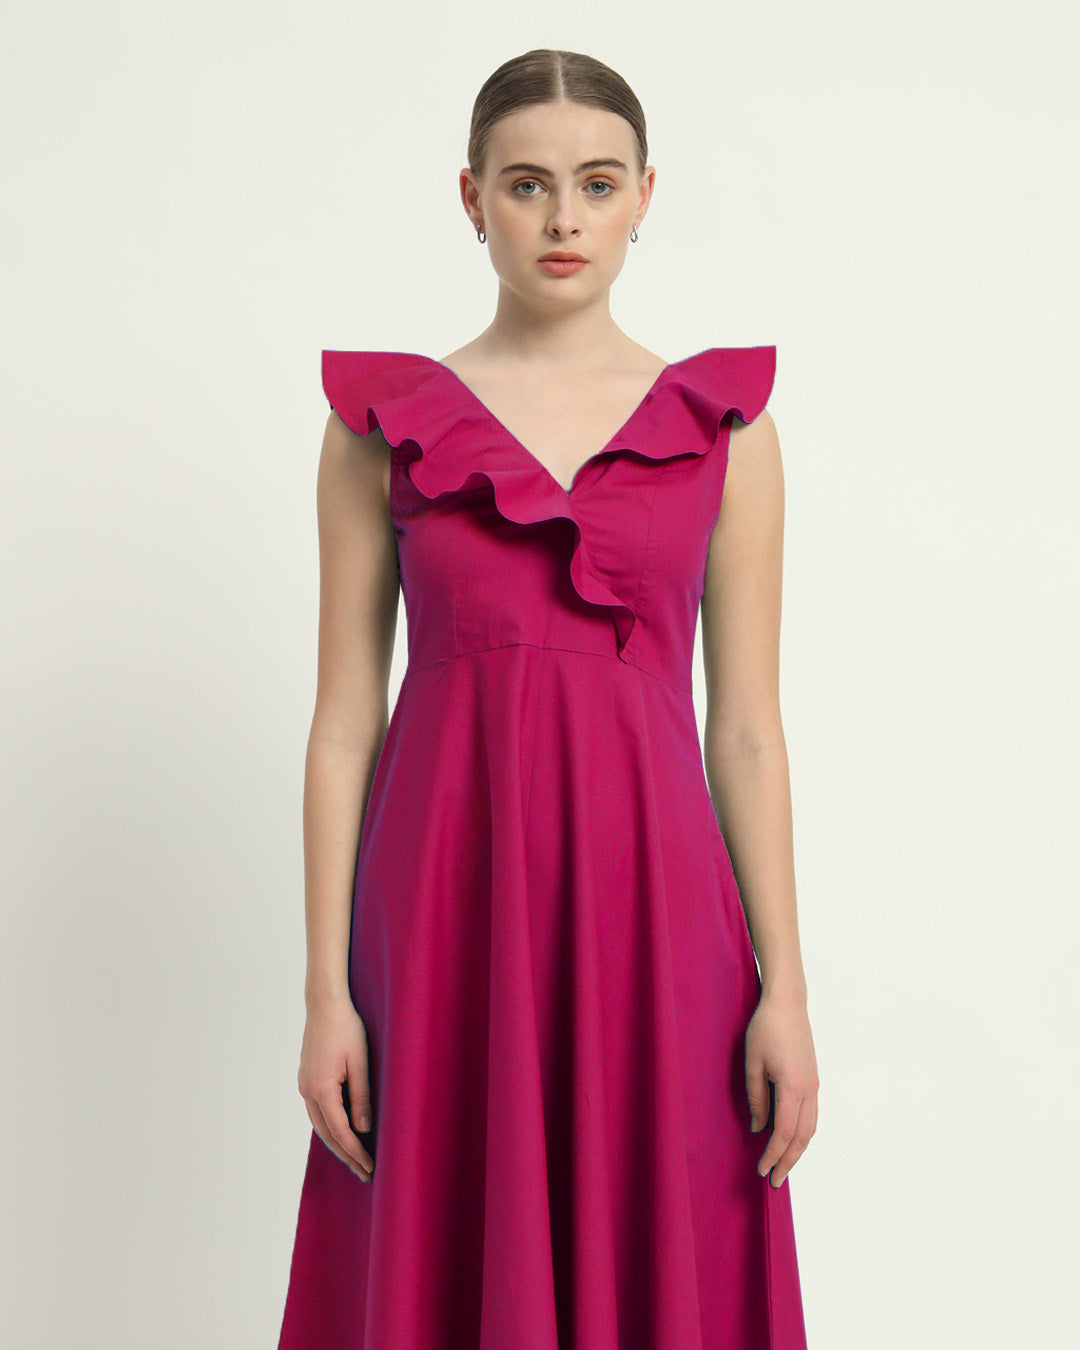 The Albany Berry Cotton Dress